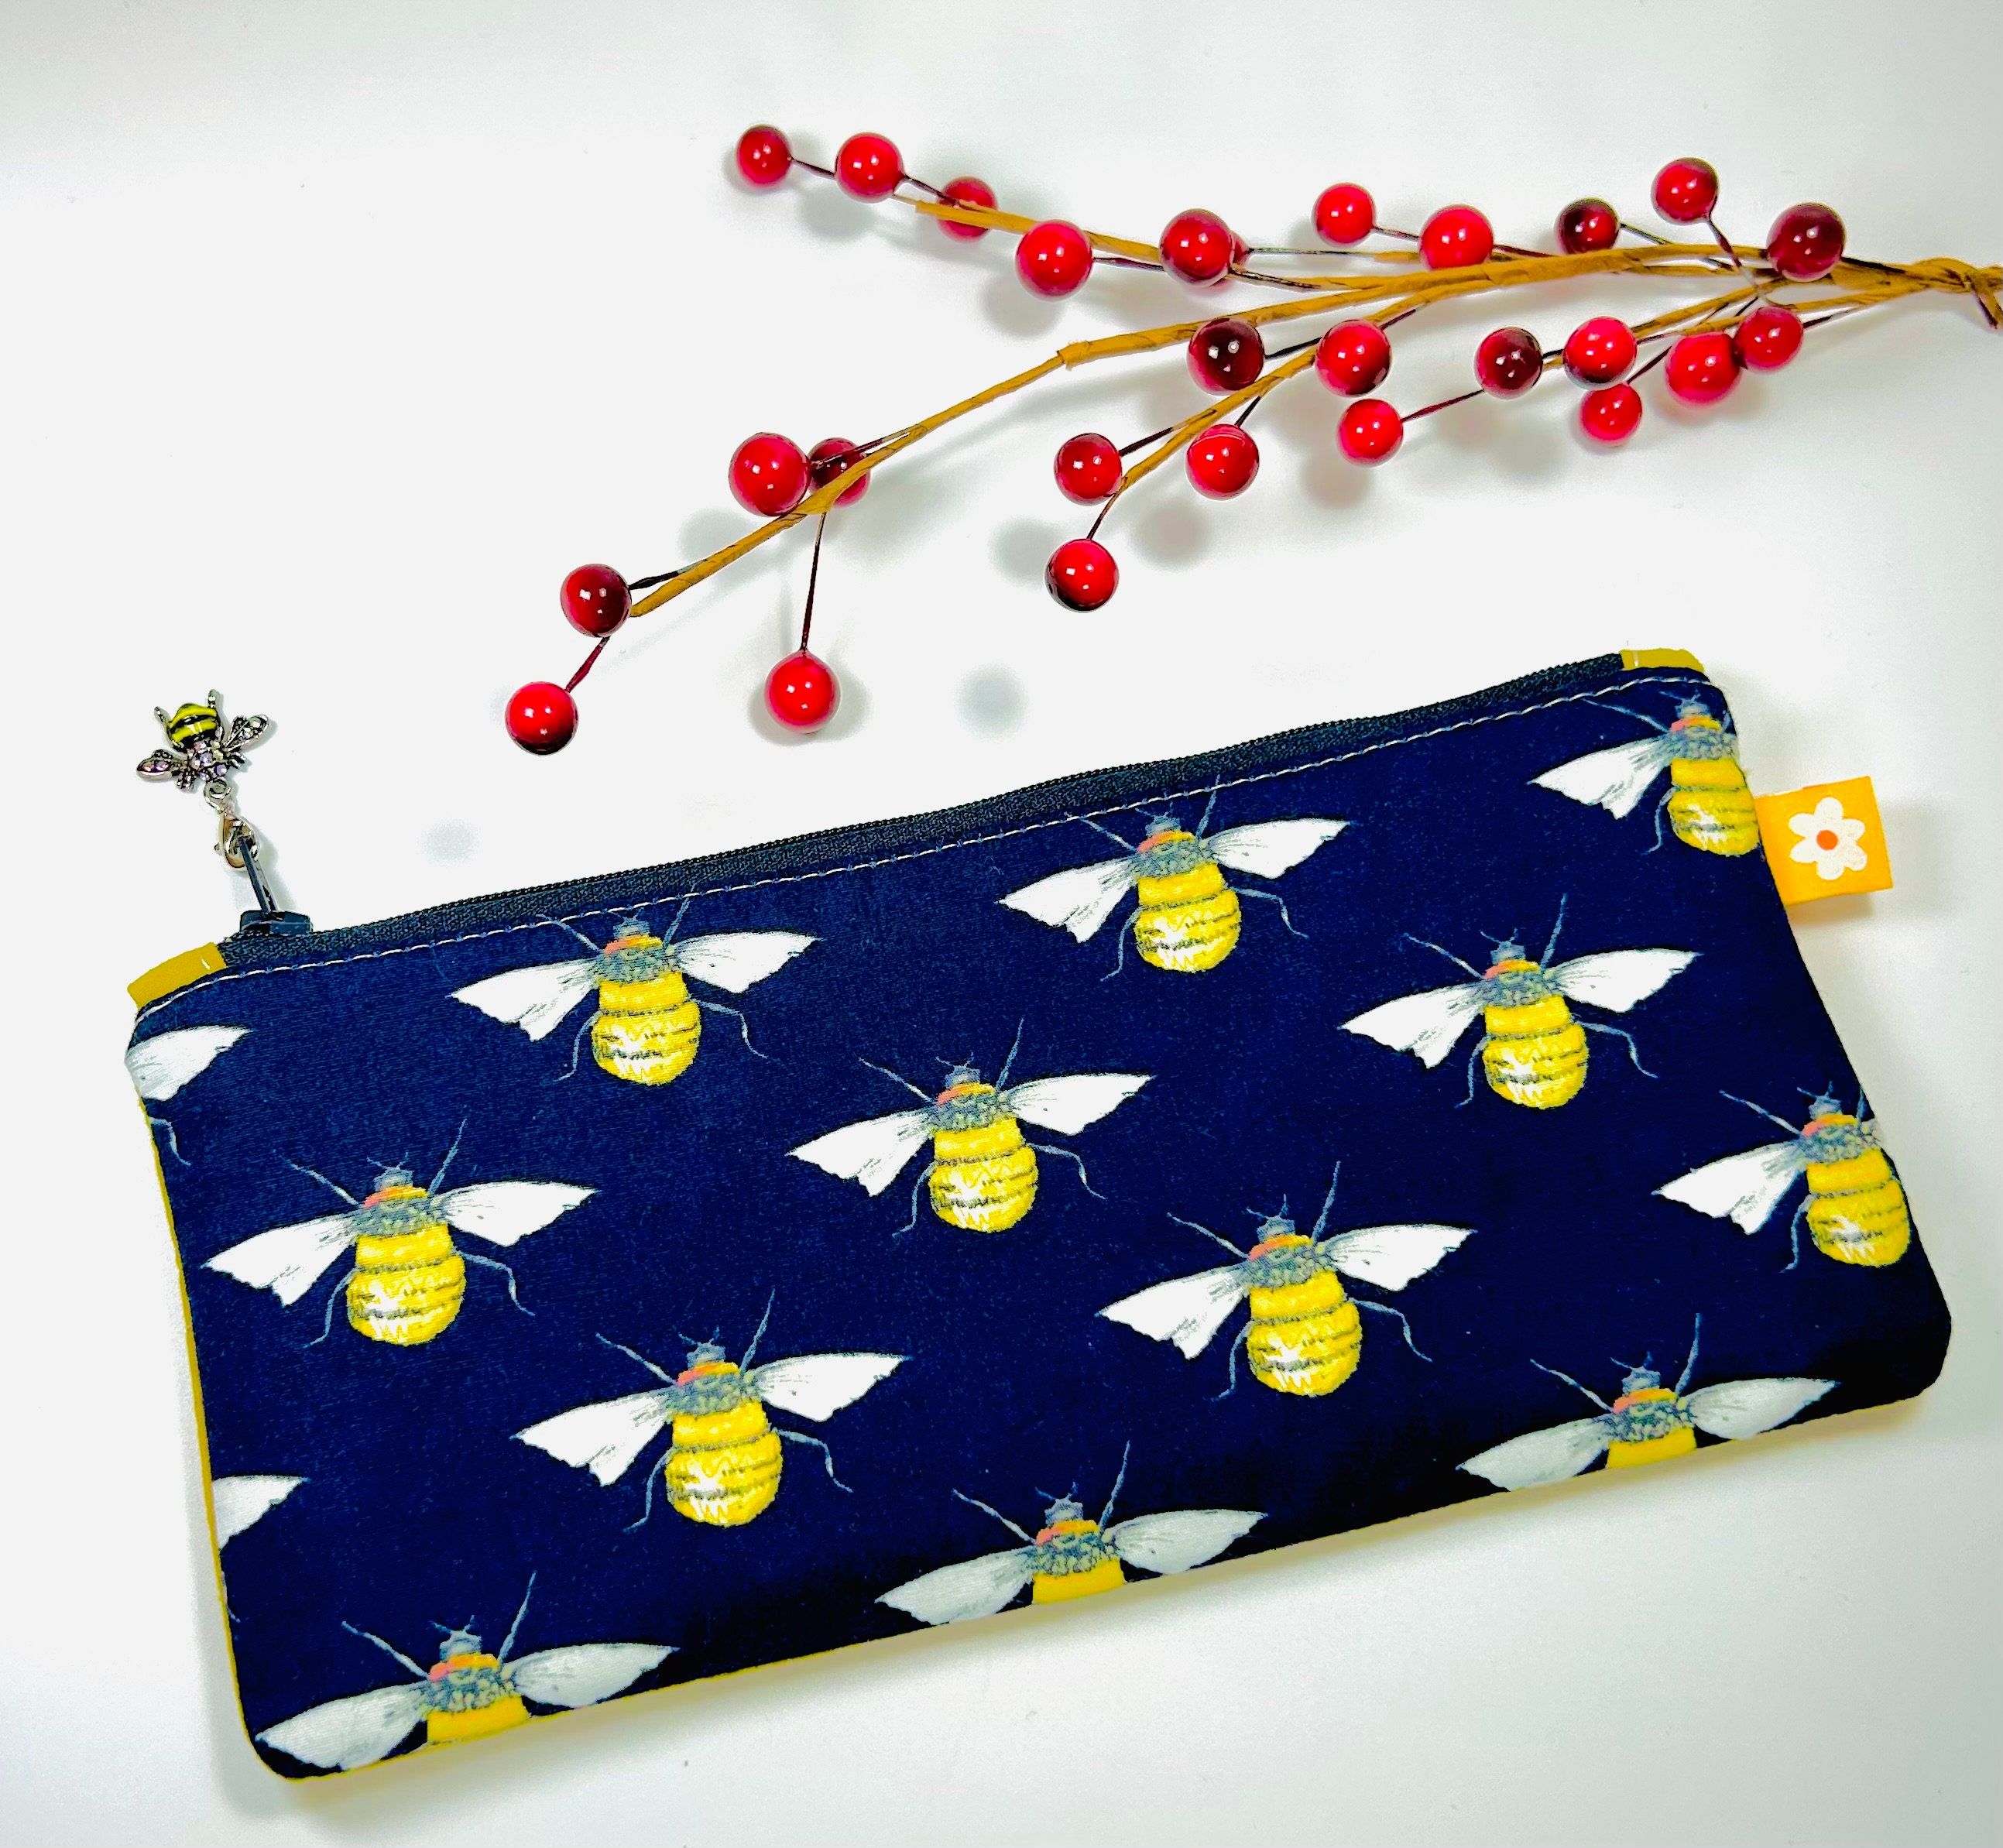 Bumble Bee Pencil Case, Bee Sunglass Pouch, Borage and Bees Cotton Pouch,  Handmade Pencil Case , Bohemian Boho Style Purse, Hippy Art Pouch 